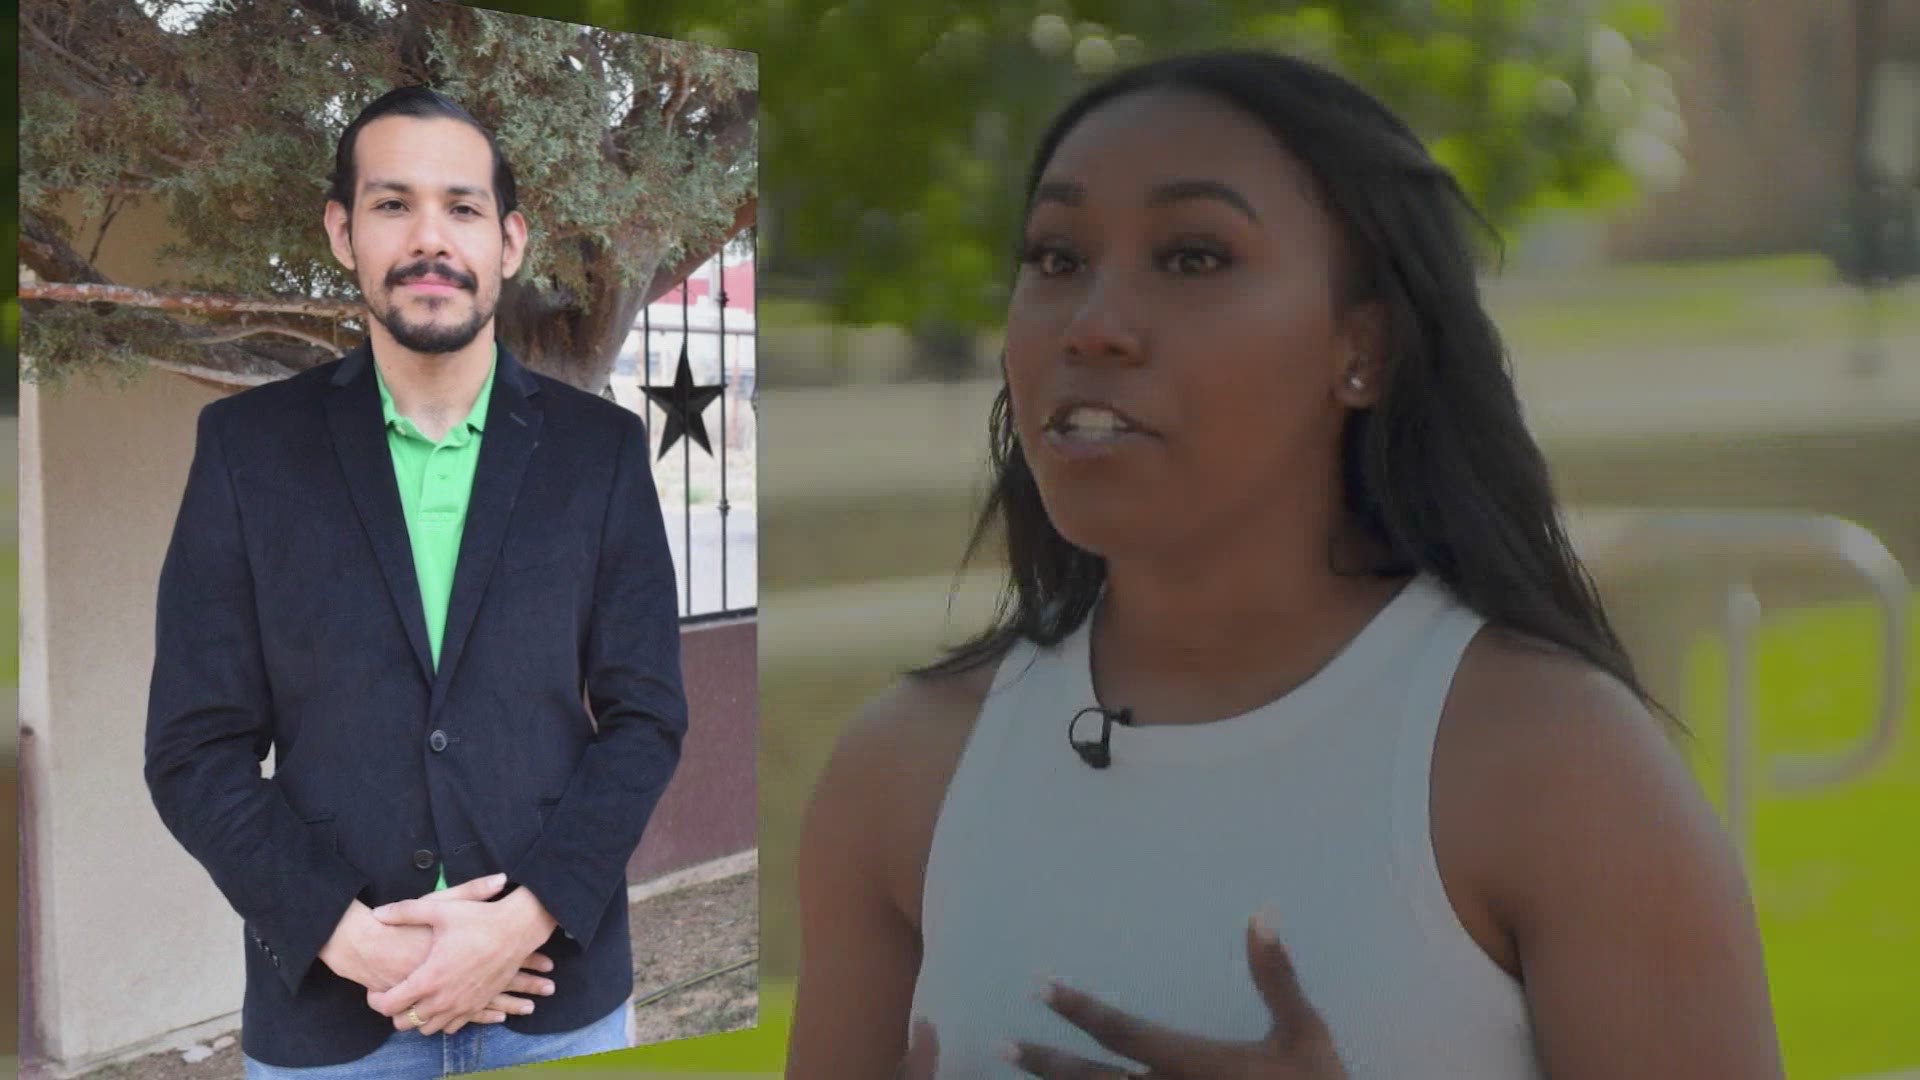 "He wrote the most powerful message back to me," says UNT student Mary Cade.